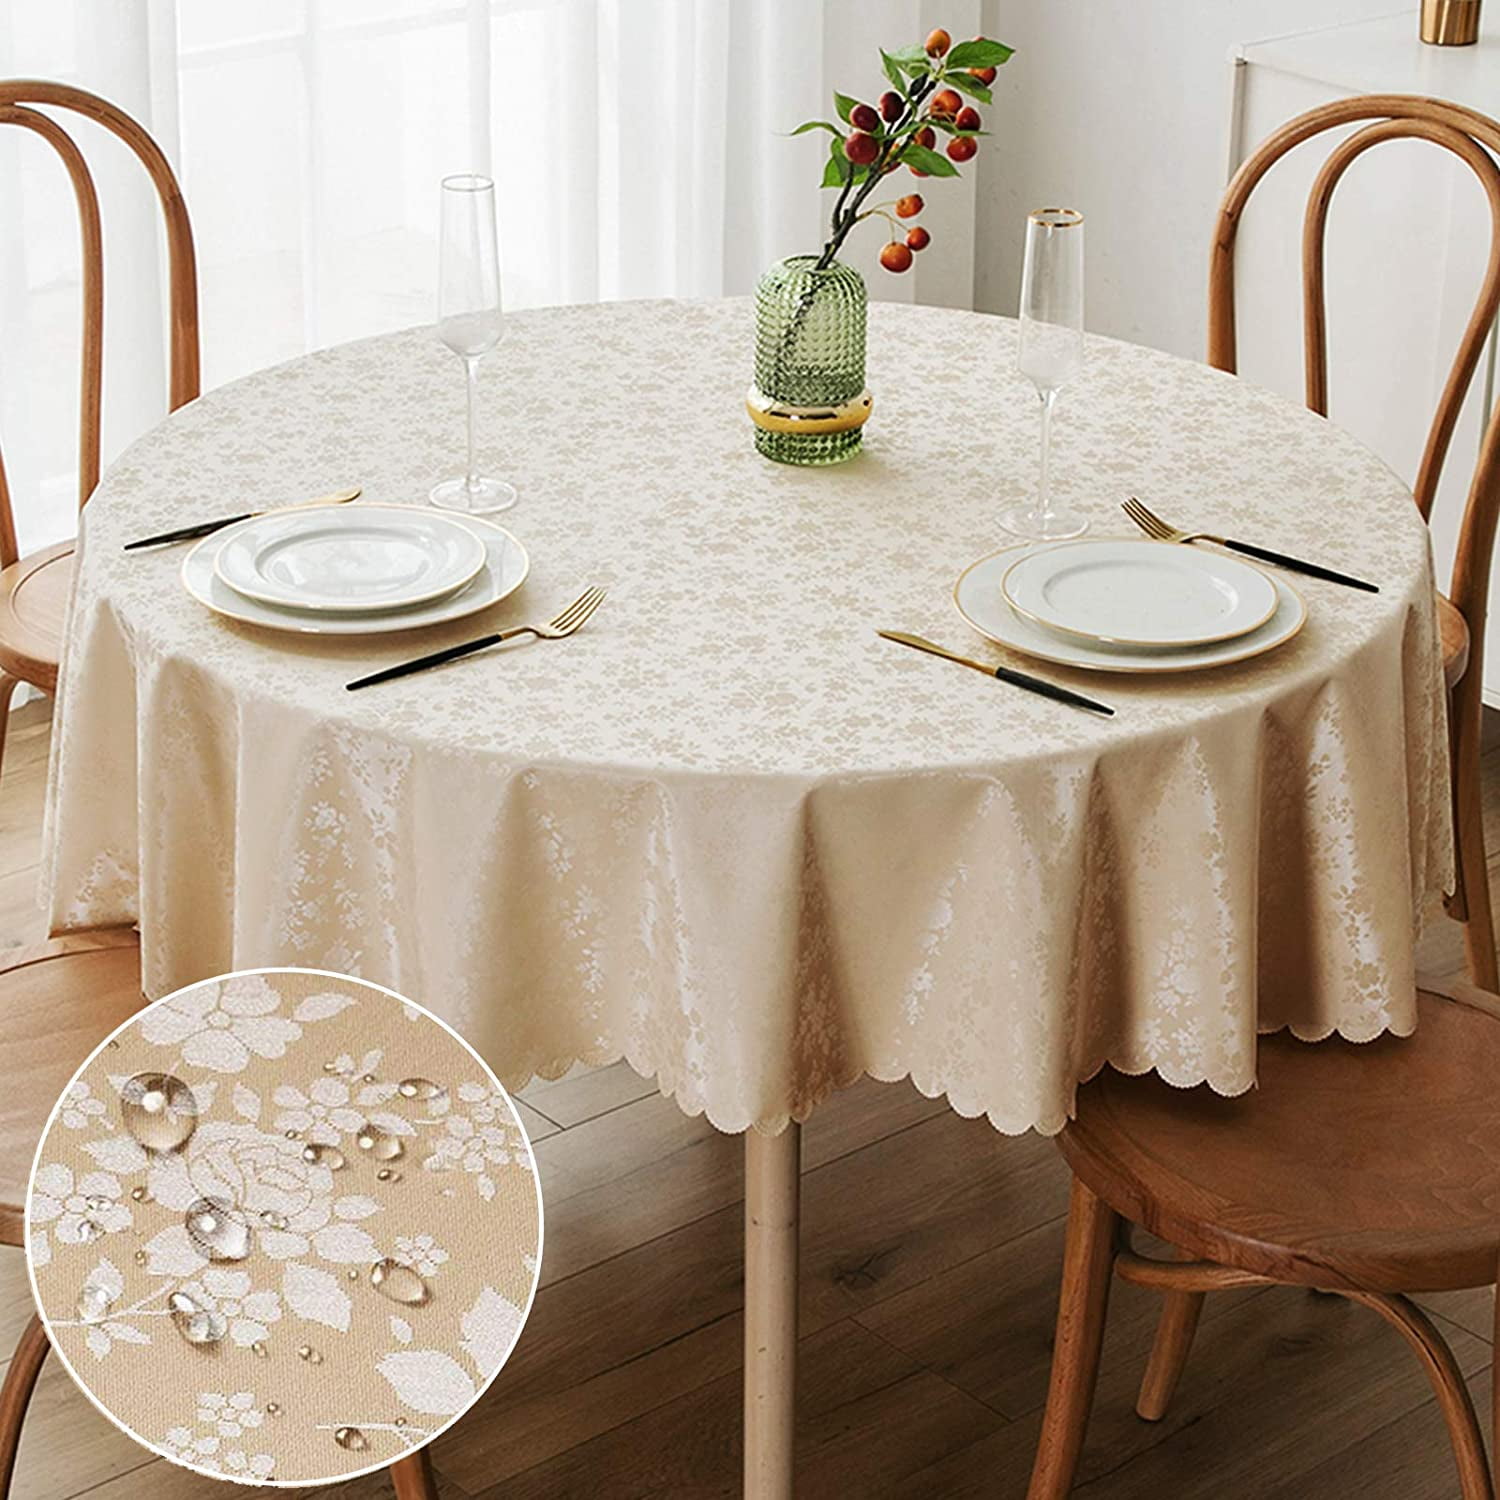 Italian Gold Marble Rectangle Tablecloth Spill Water Proof for Outdoor Indoor Table 54x72